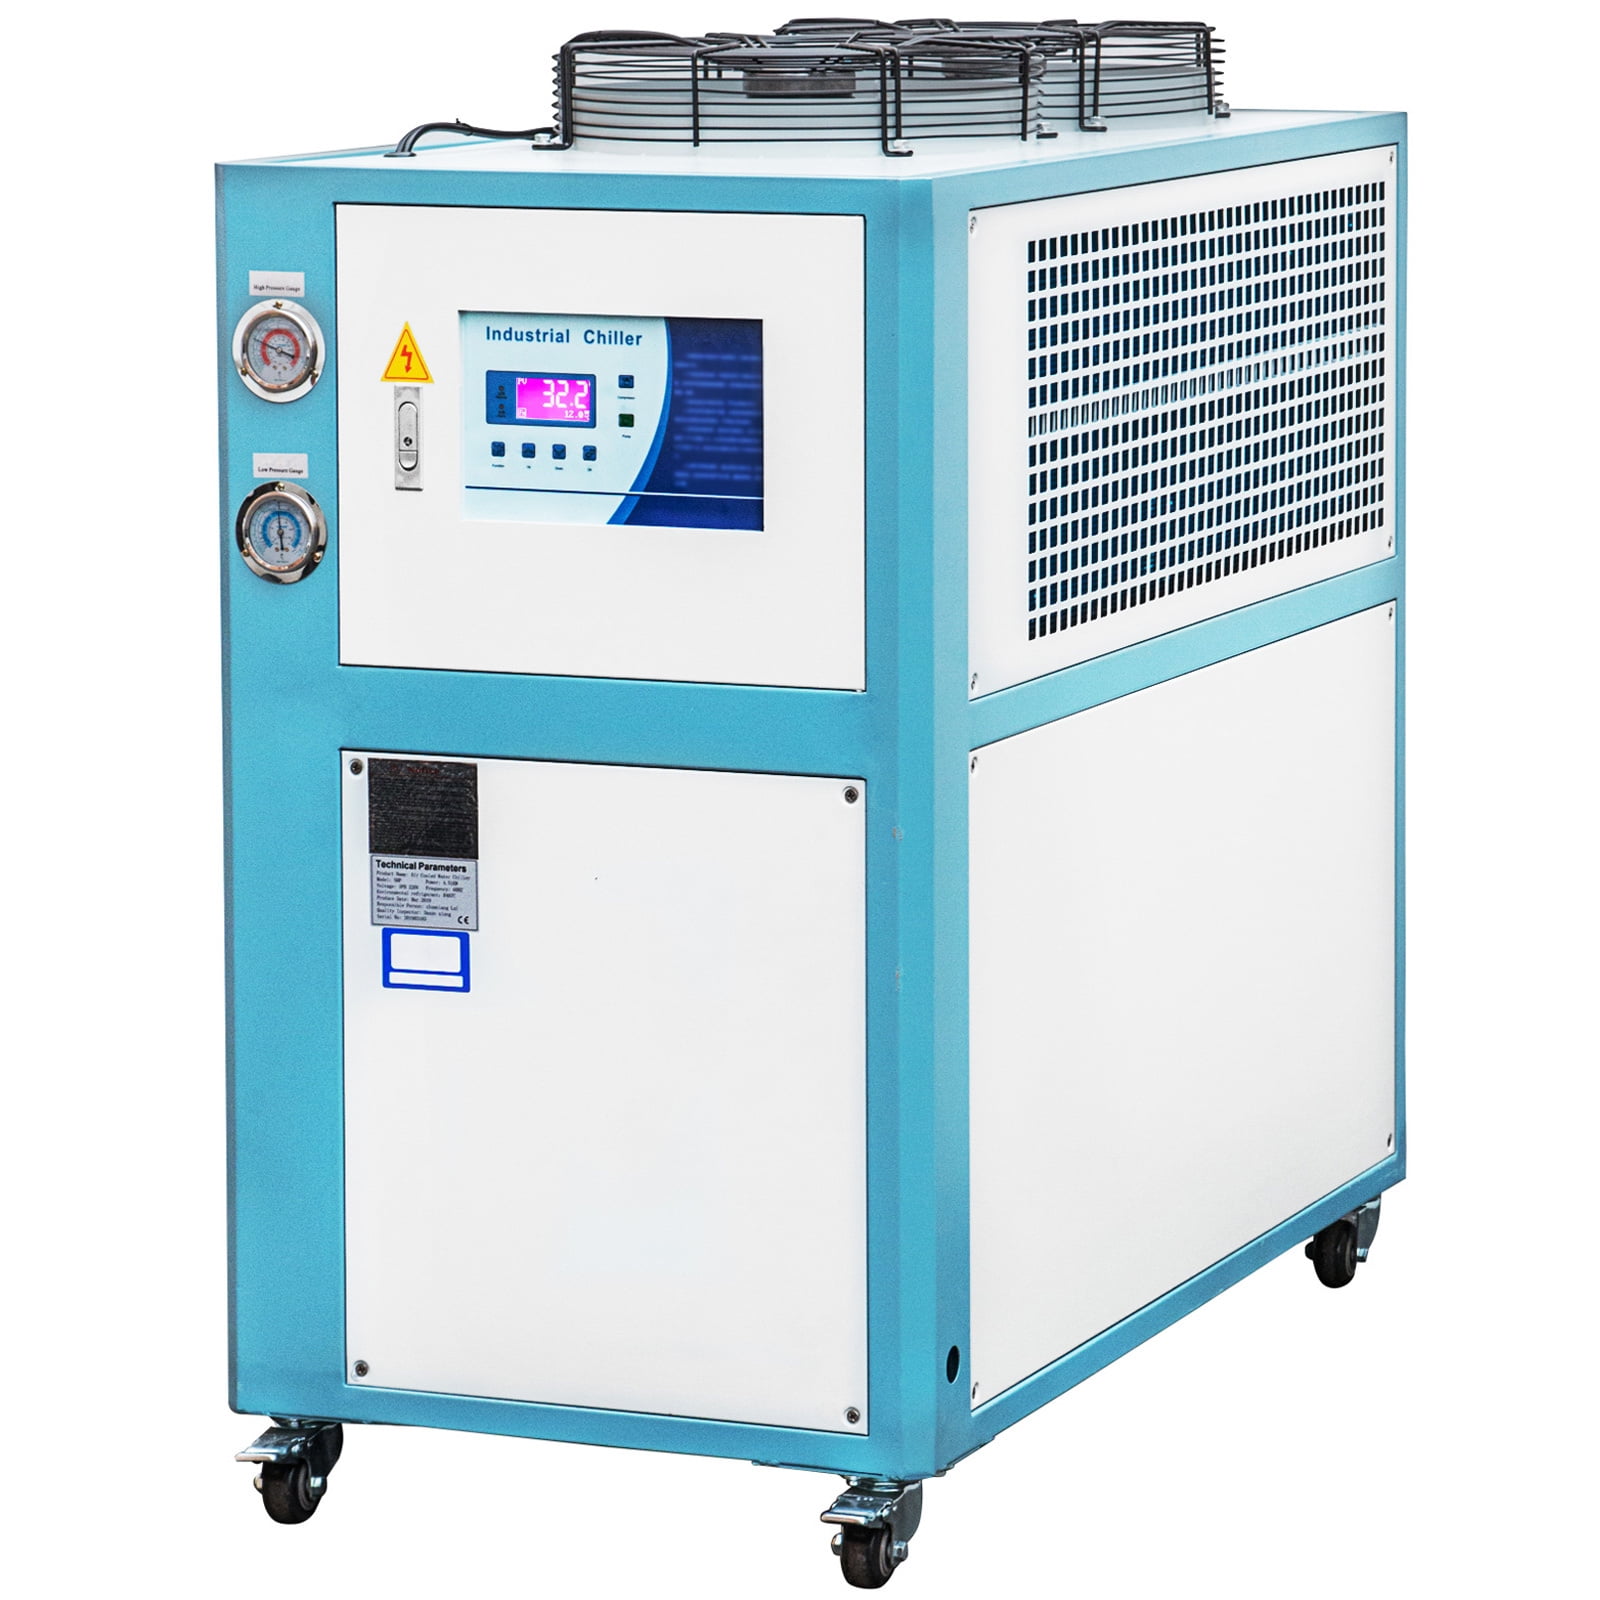 Zuick Air Cooled 5 Ton Industrial Chiller 